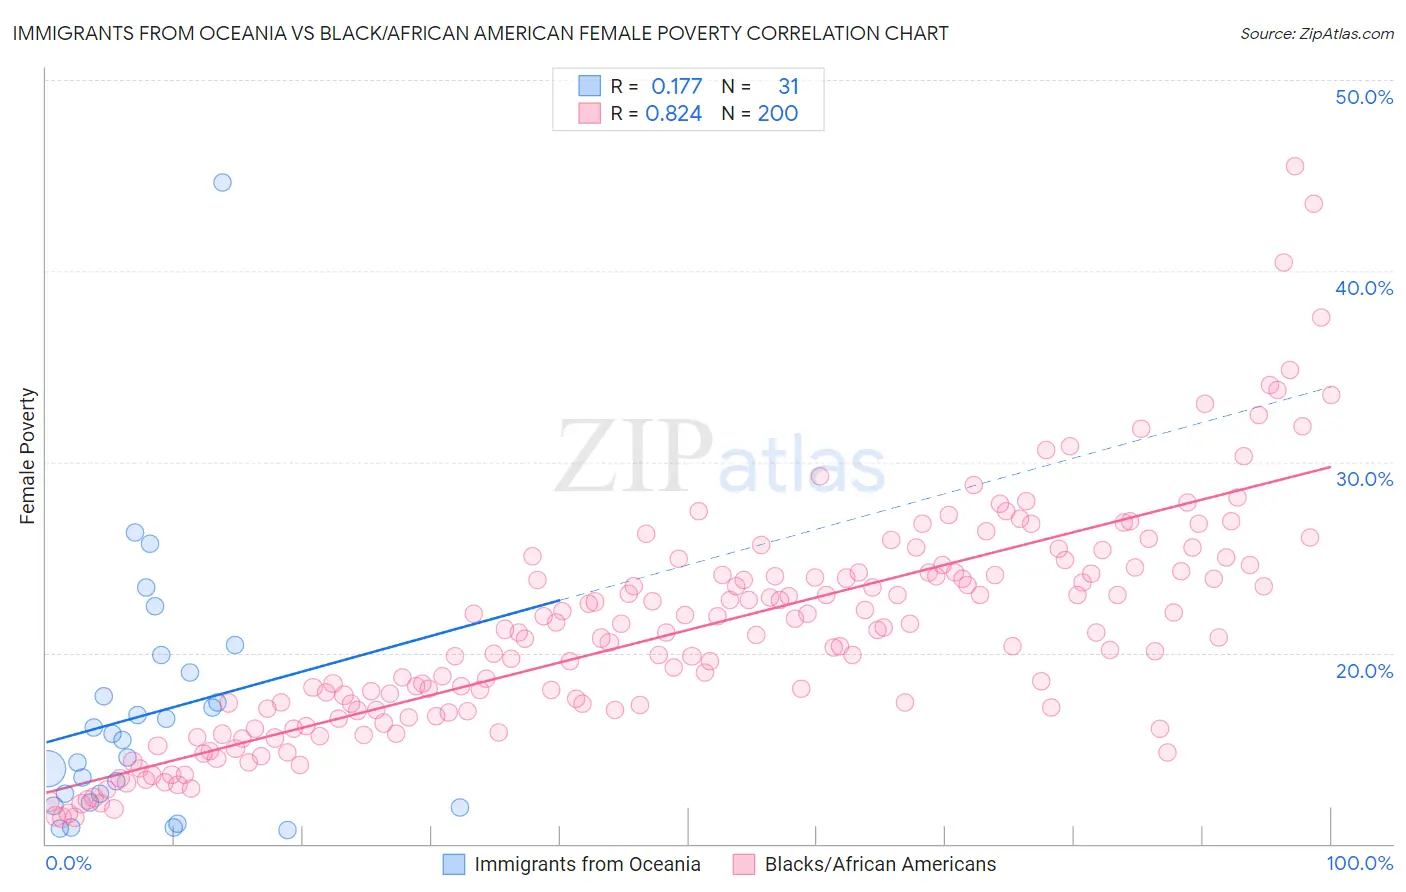 Immigrants from Oceania vs Black/African American Female Poverty